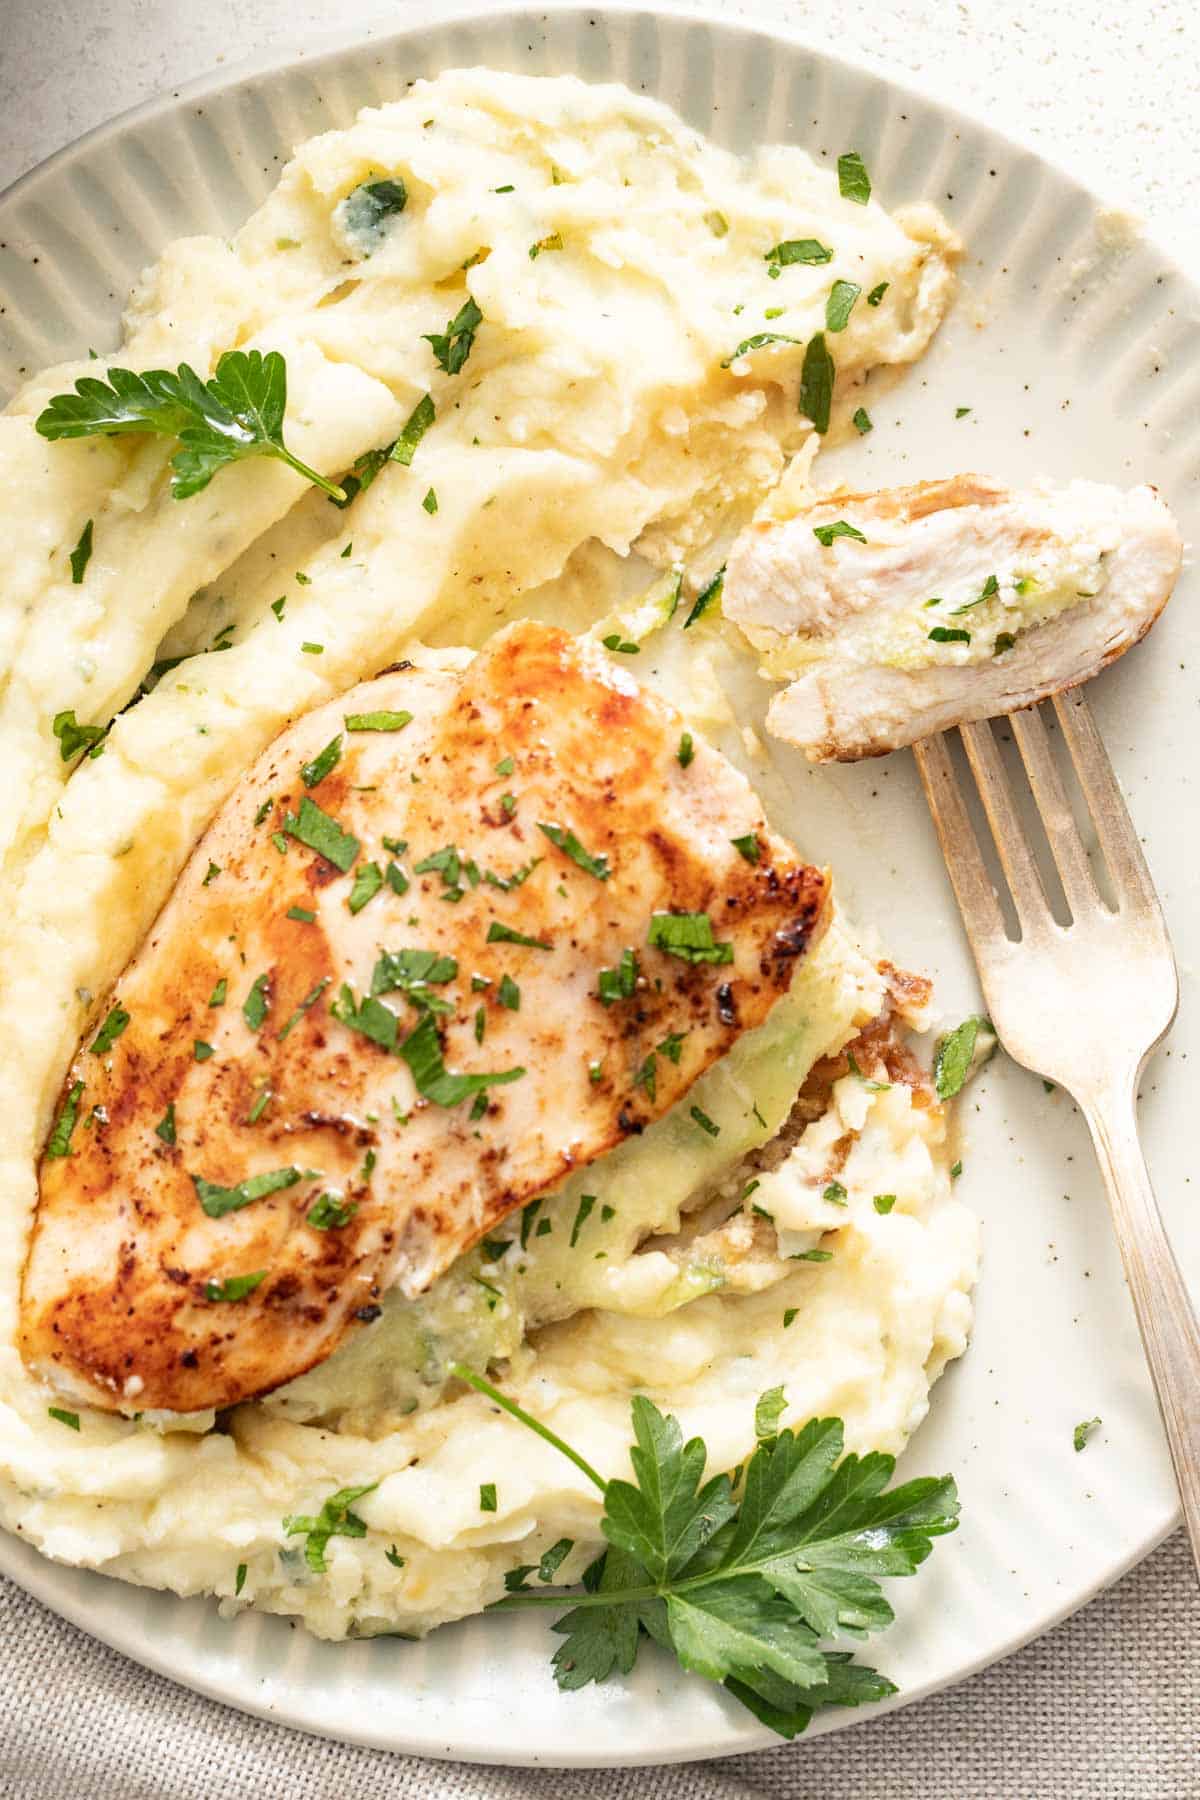 A sliced chicken stuffed with ricotta cheese and zucchini.